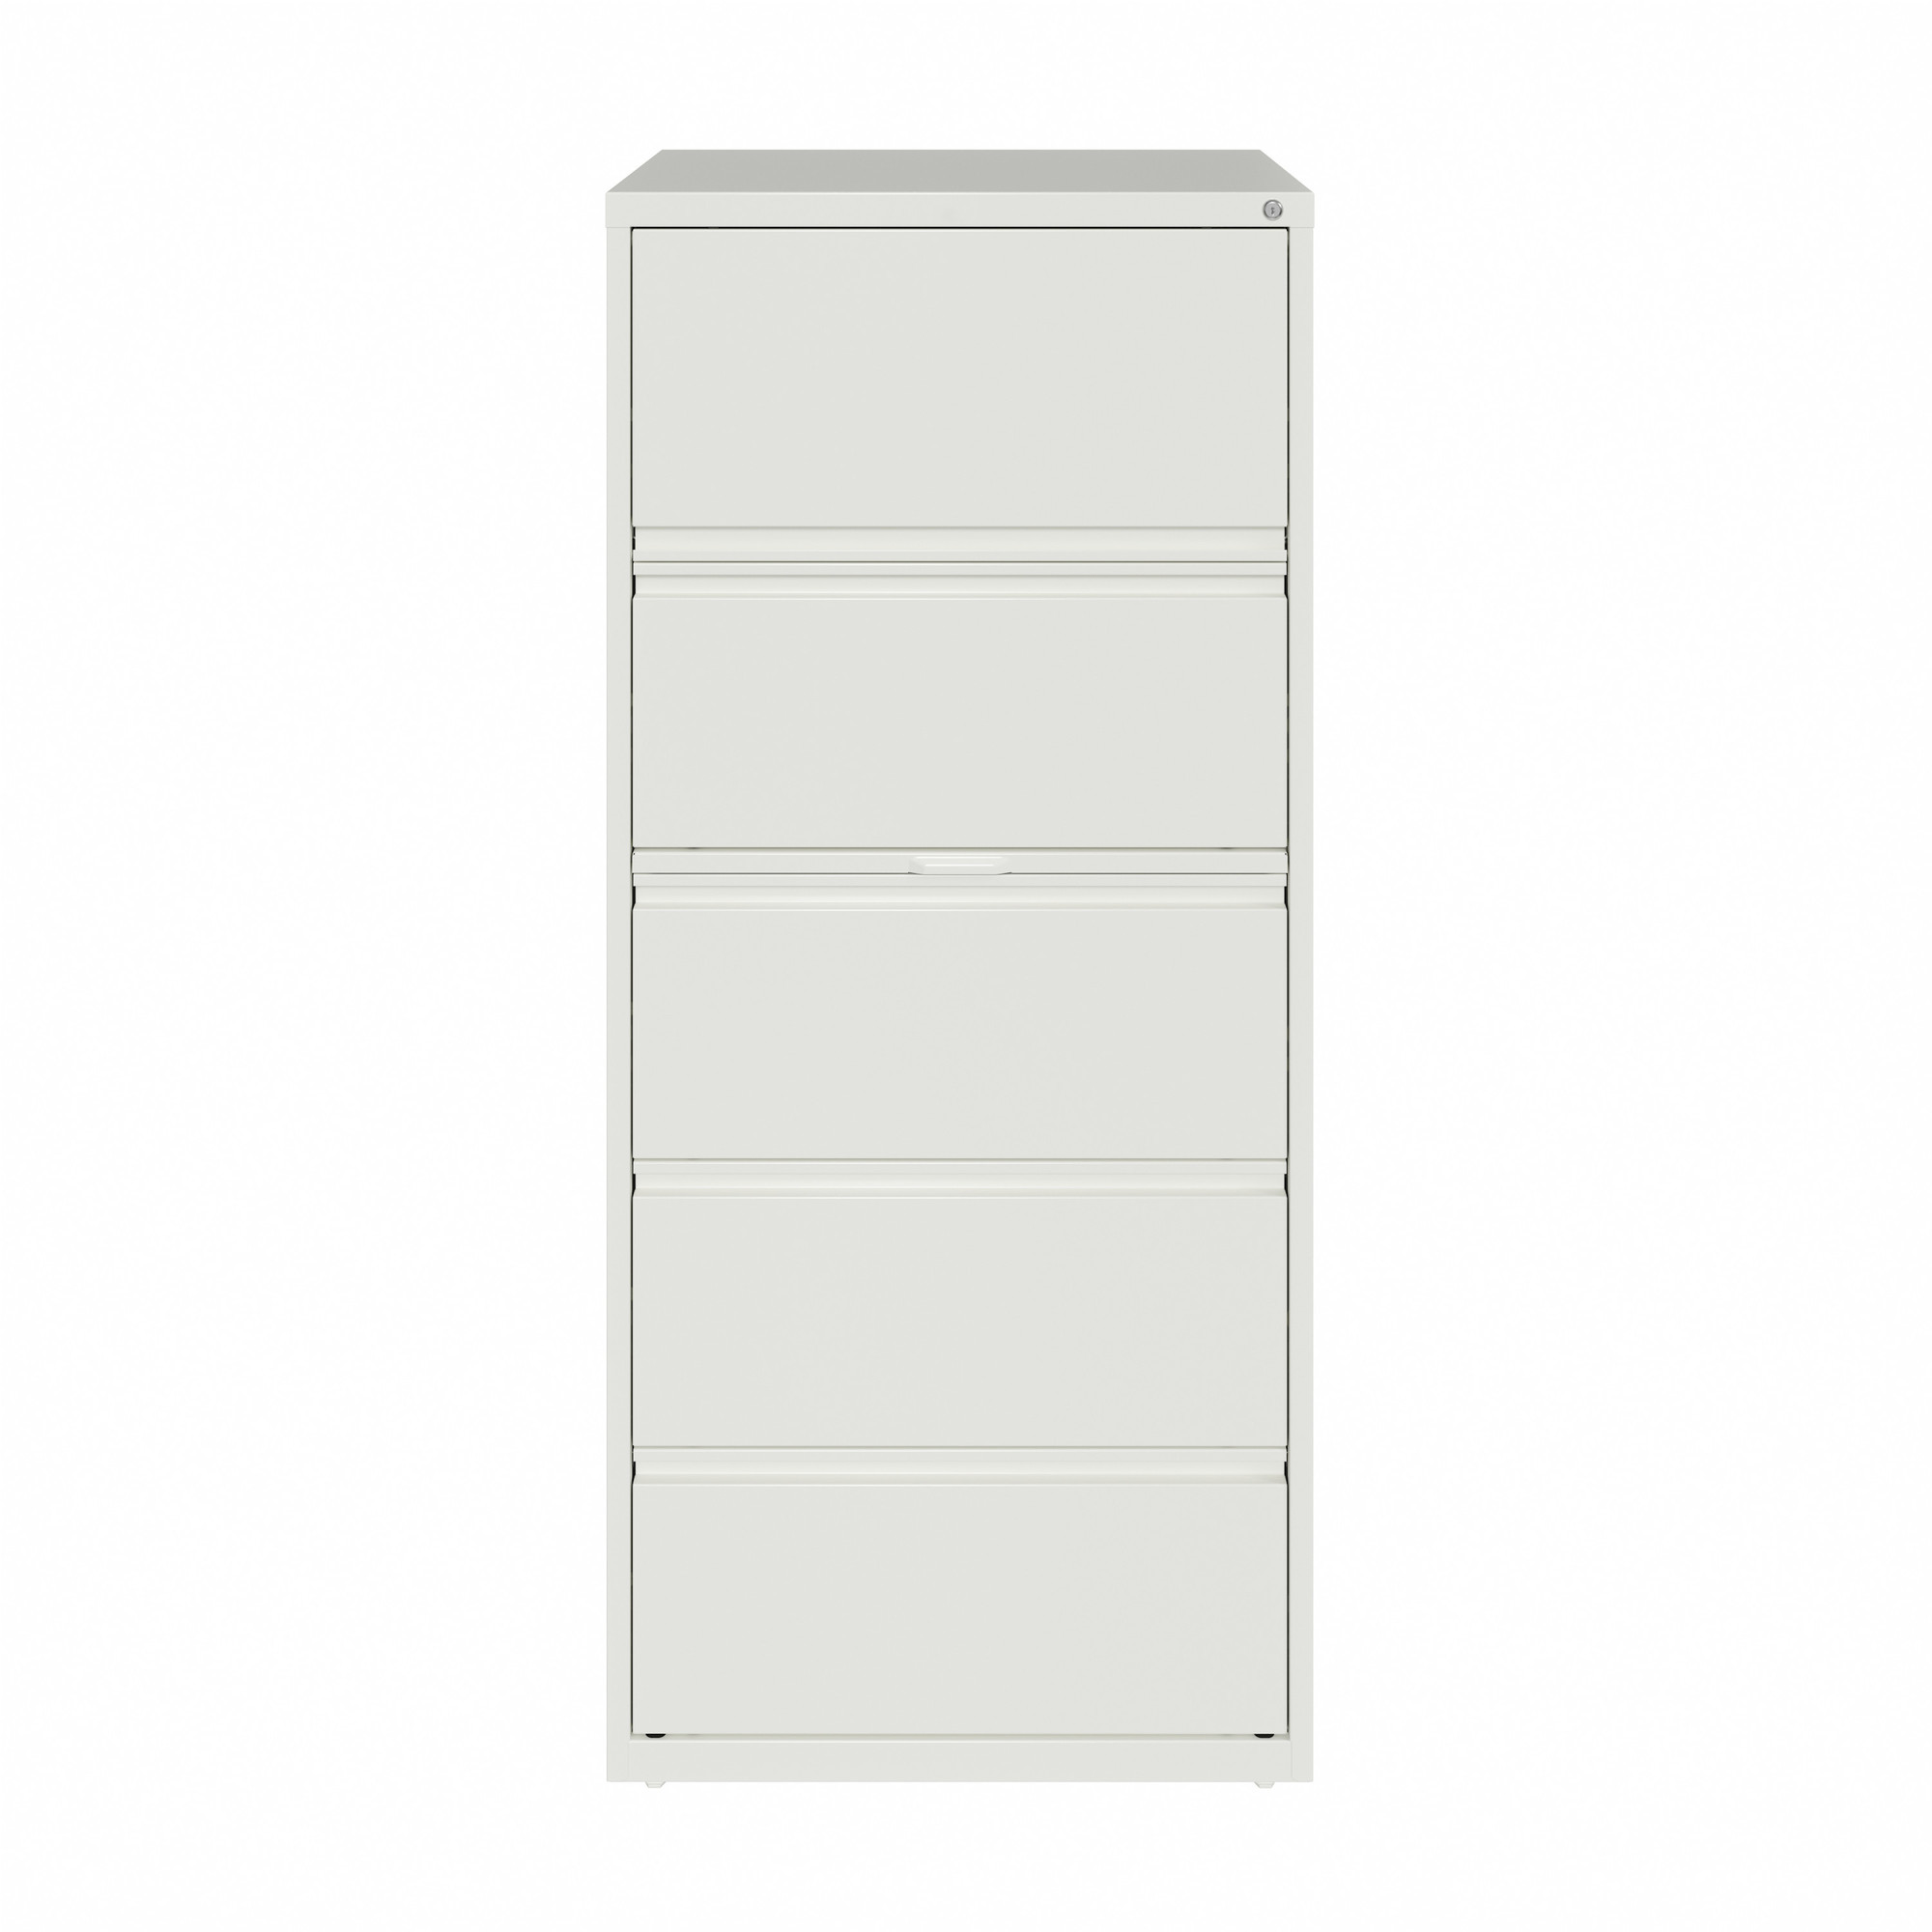 Hirsh Industries, 5 Drawer Lateral File Cabinet, Width 30 in, Depth 18.625 in, Height 67.625 in, Model 23699